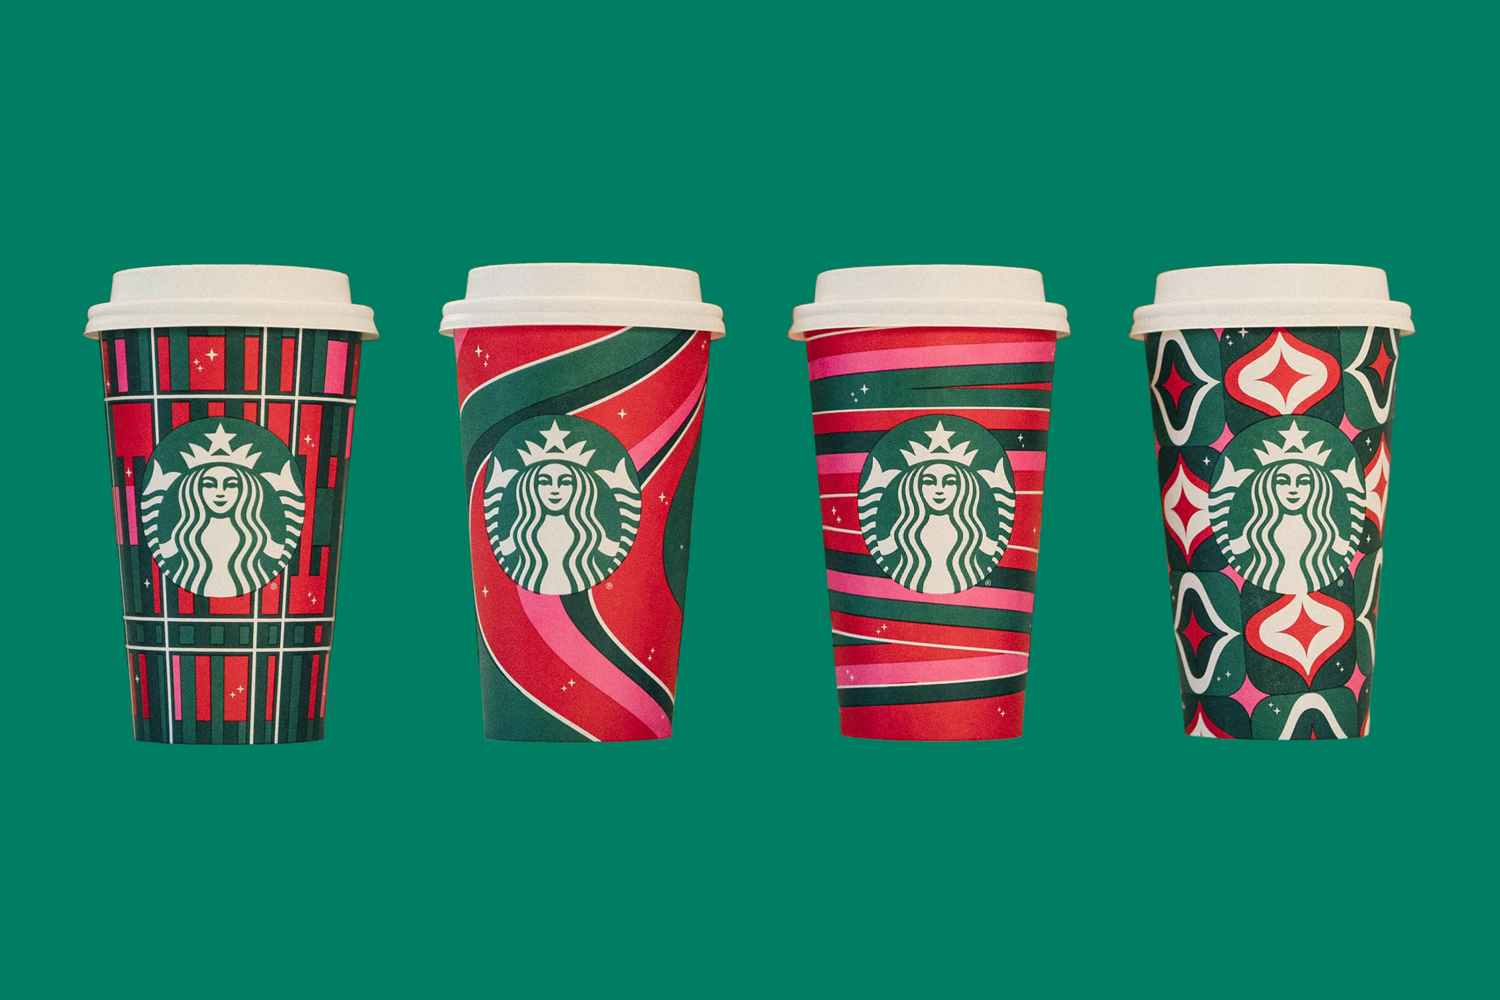 https://prod-cdn-thekrazycouponlady.imgix.net/wp-content/uploads/2022/11/starbucks-red-cup-designs-2023-1700063721-1700063722.jpg?auto=format&fit=fill&q=25